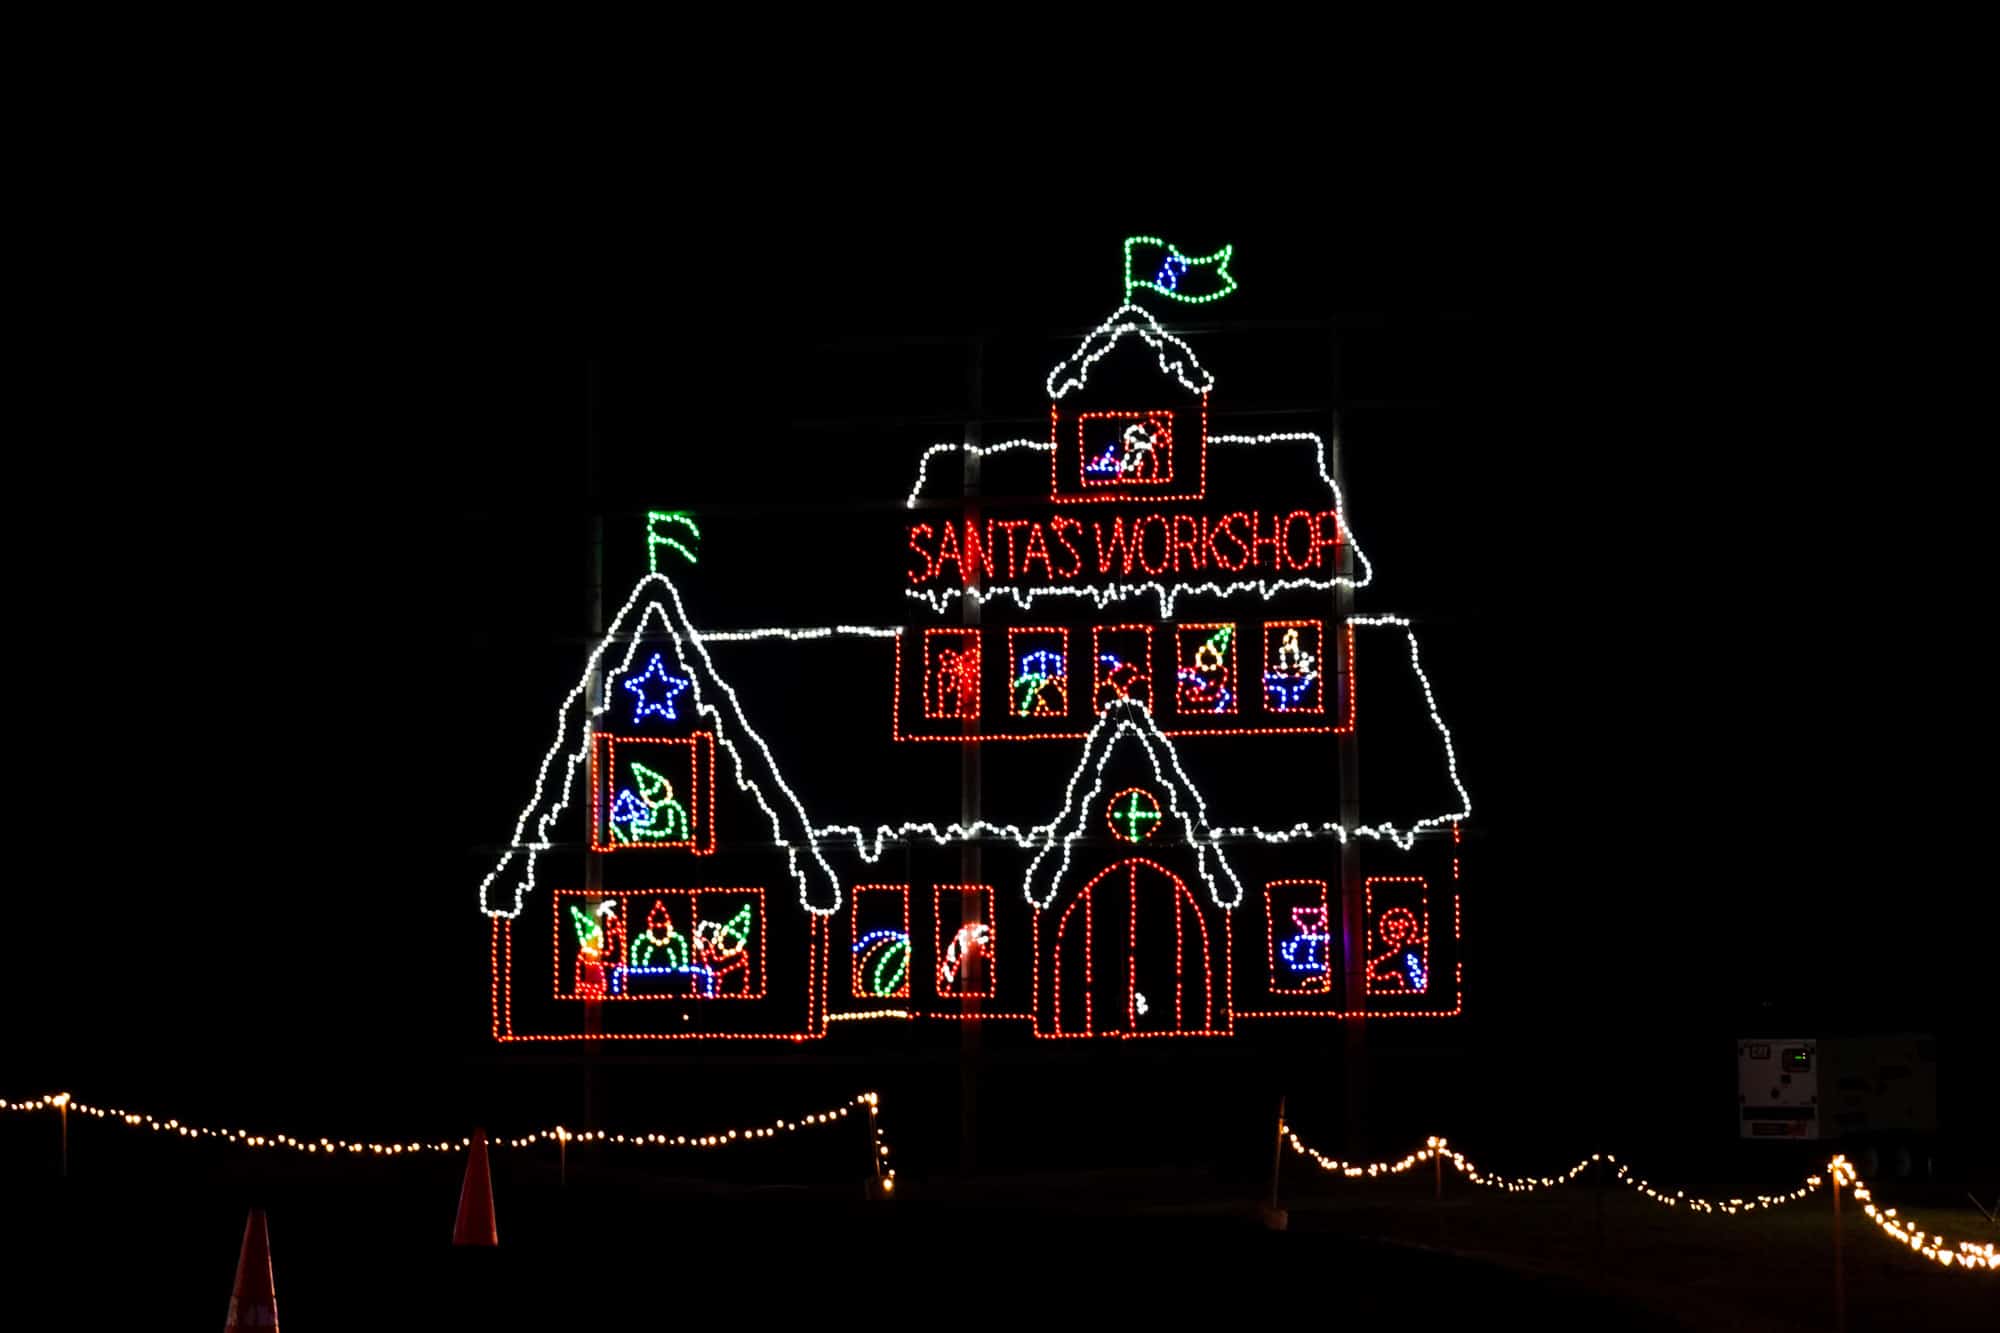 Christmas light display shaped like a house with a sign for "Santa's Workshop."